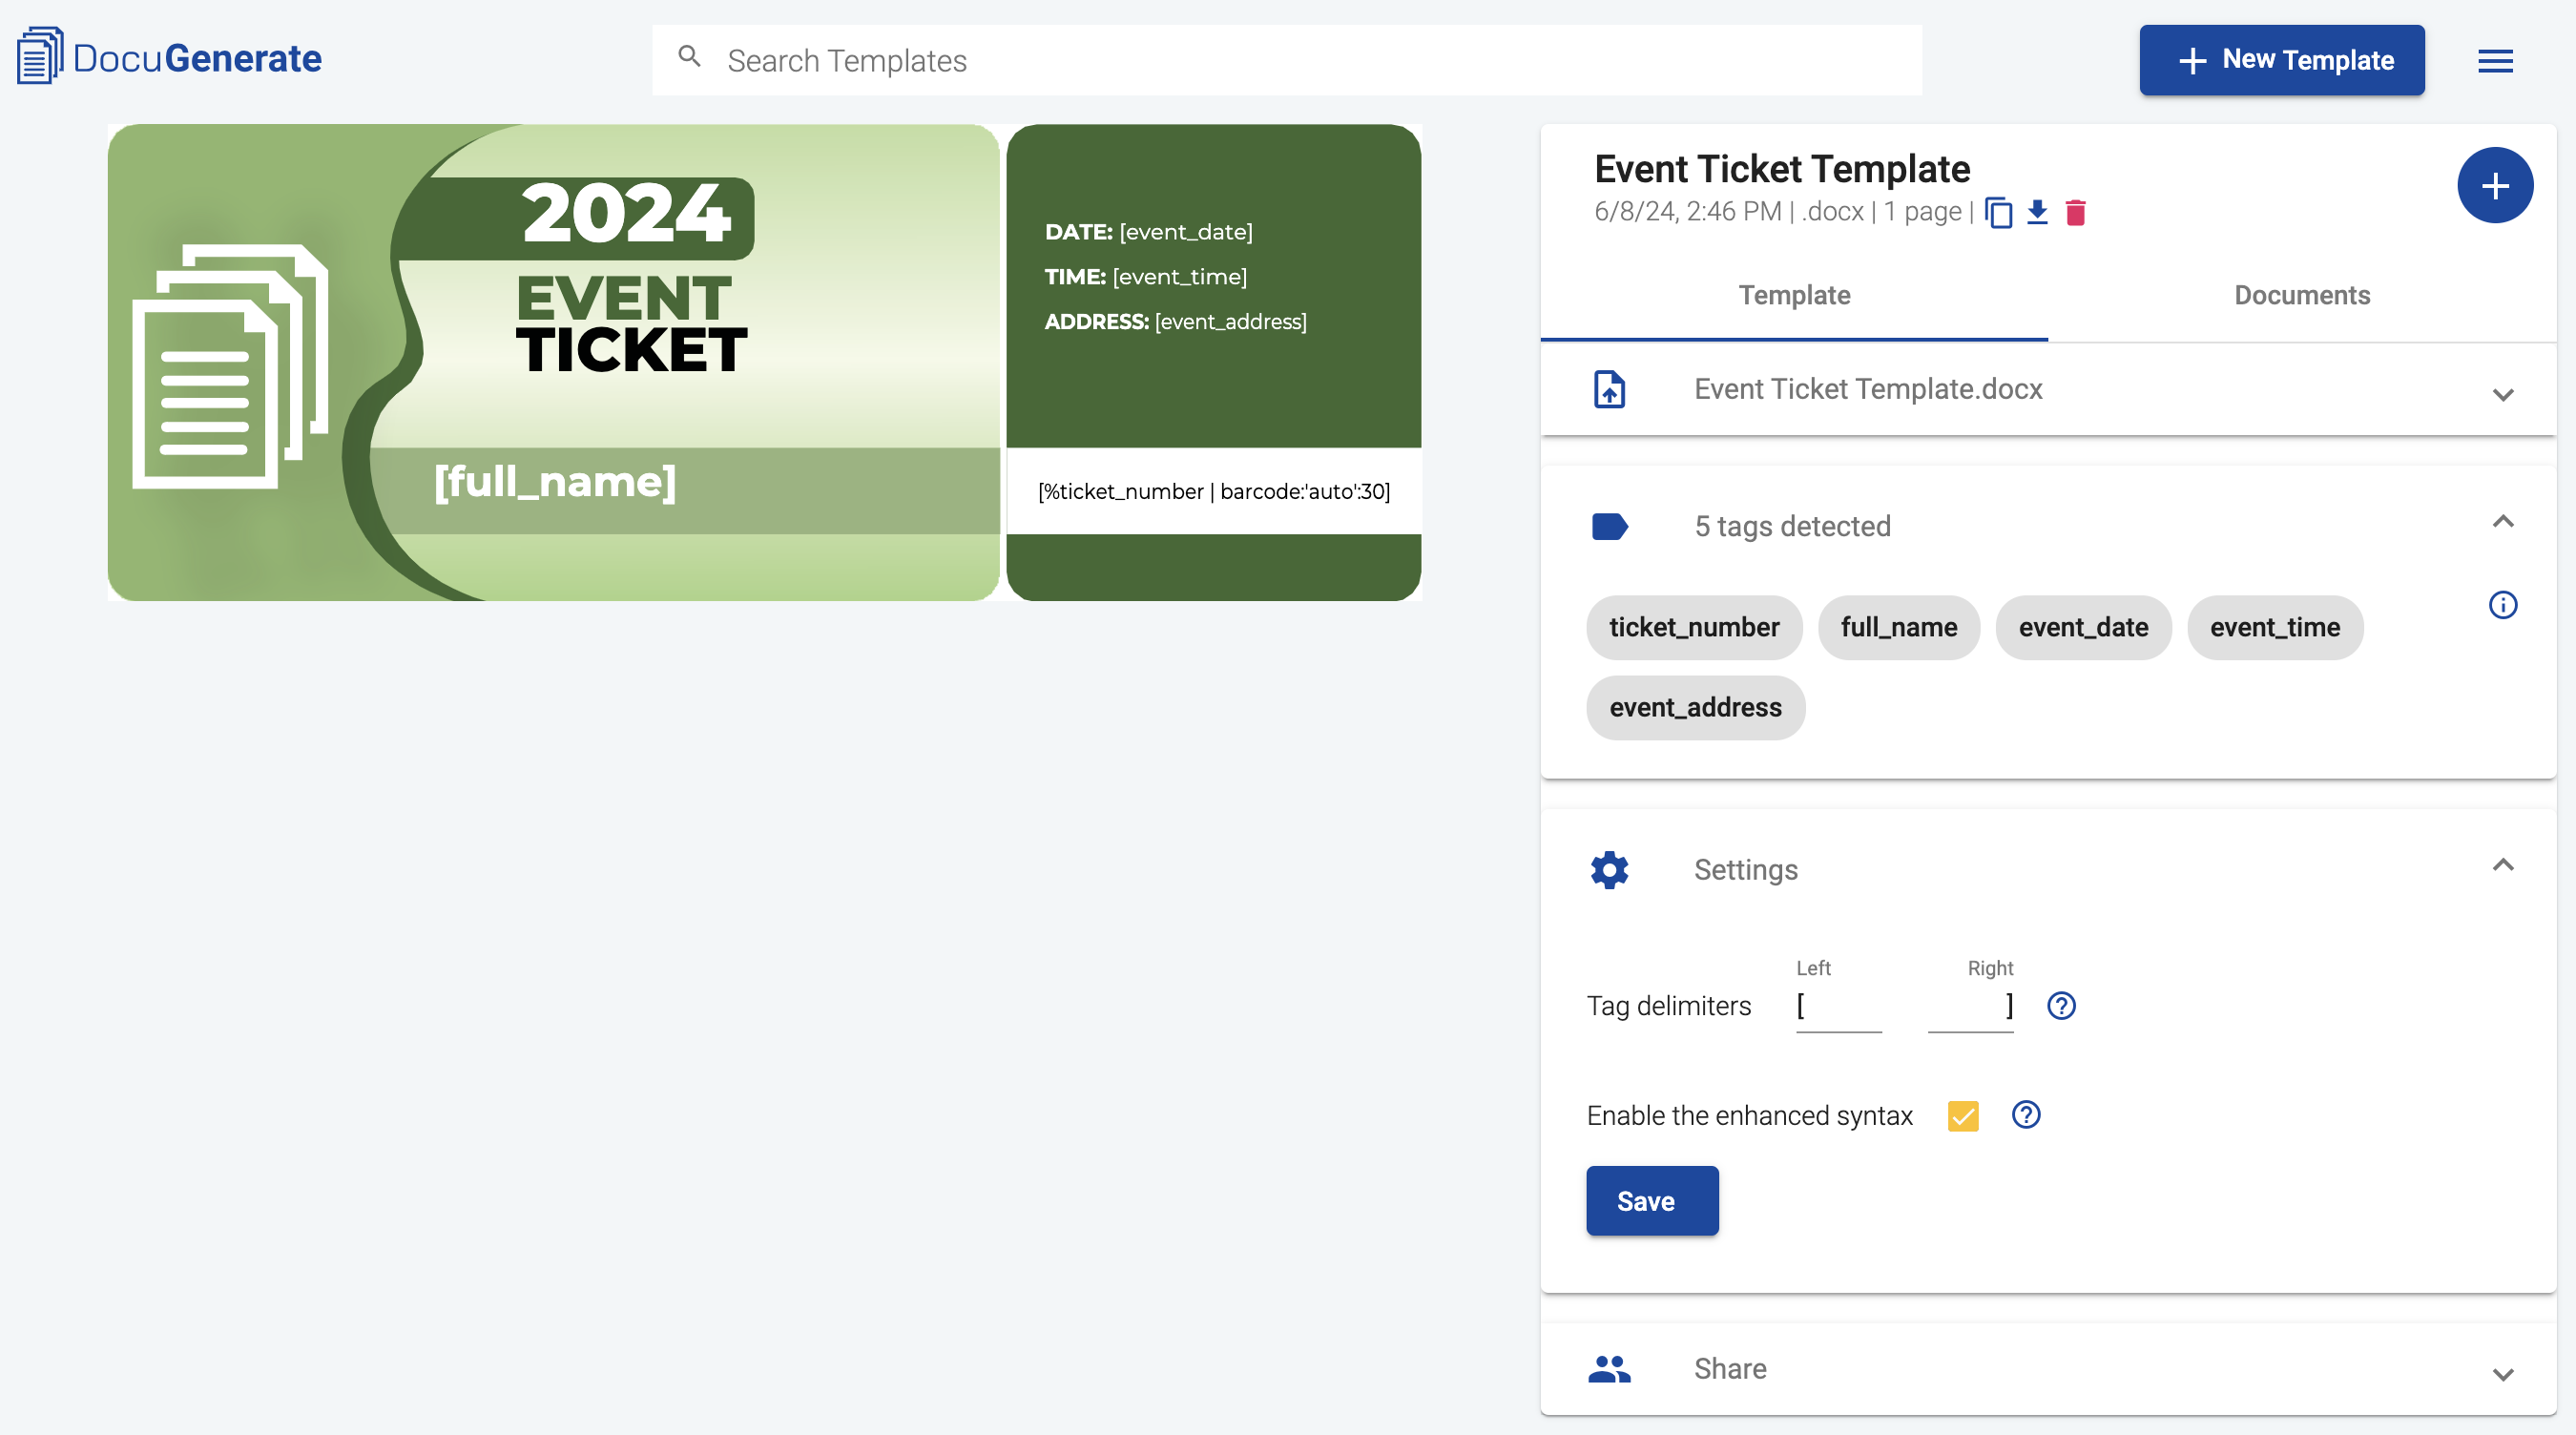 The "Event Ticket Template" on DocuGenerate